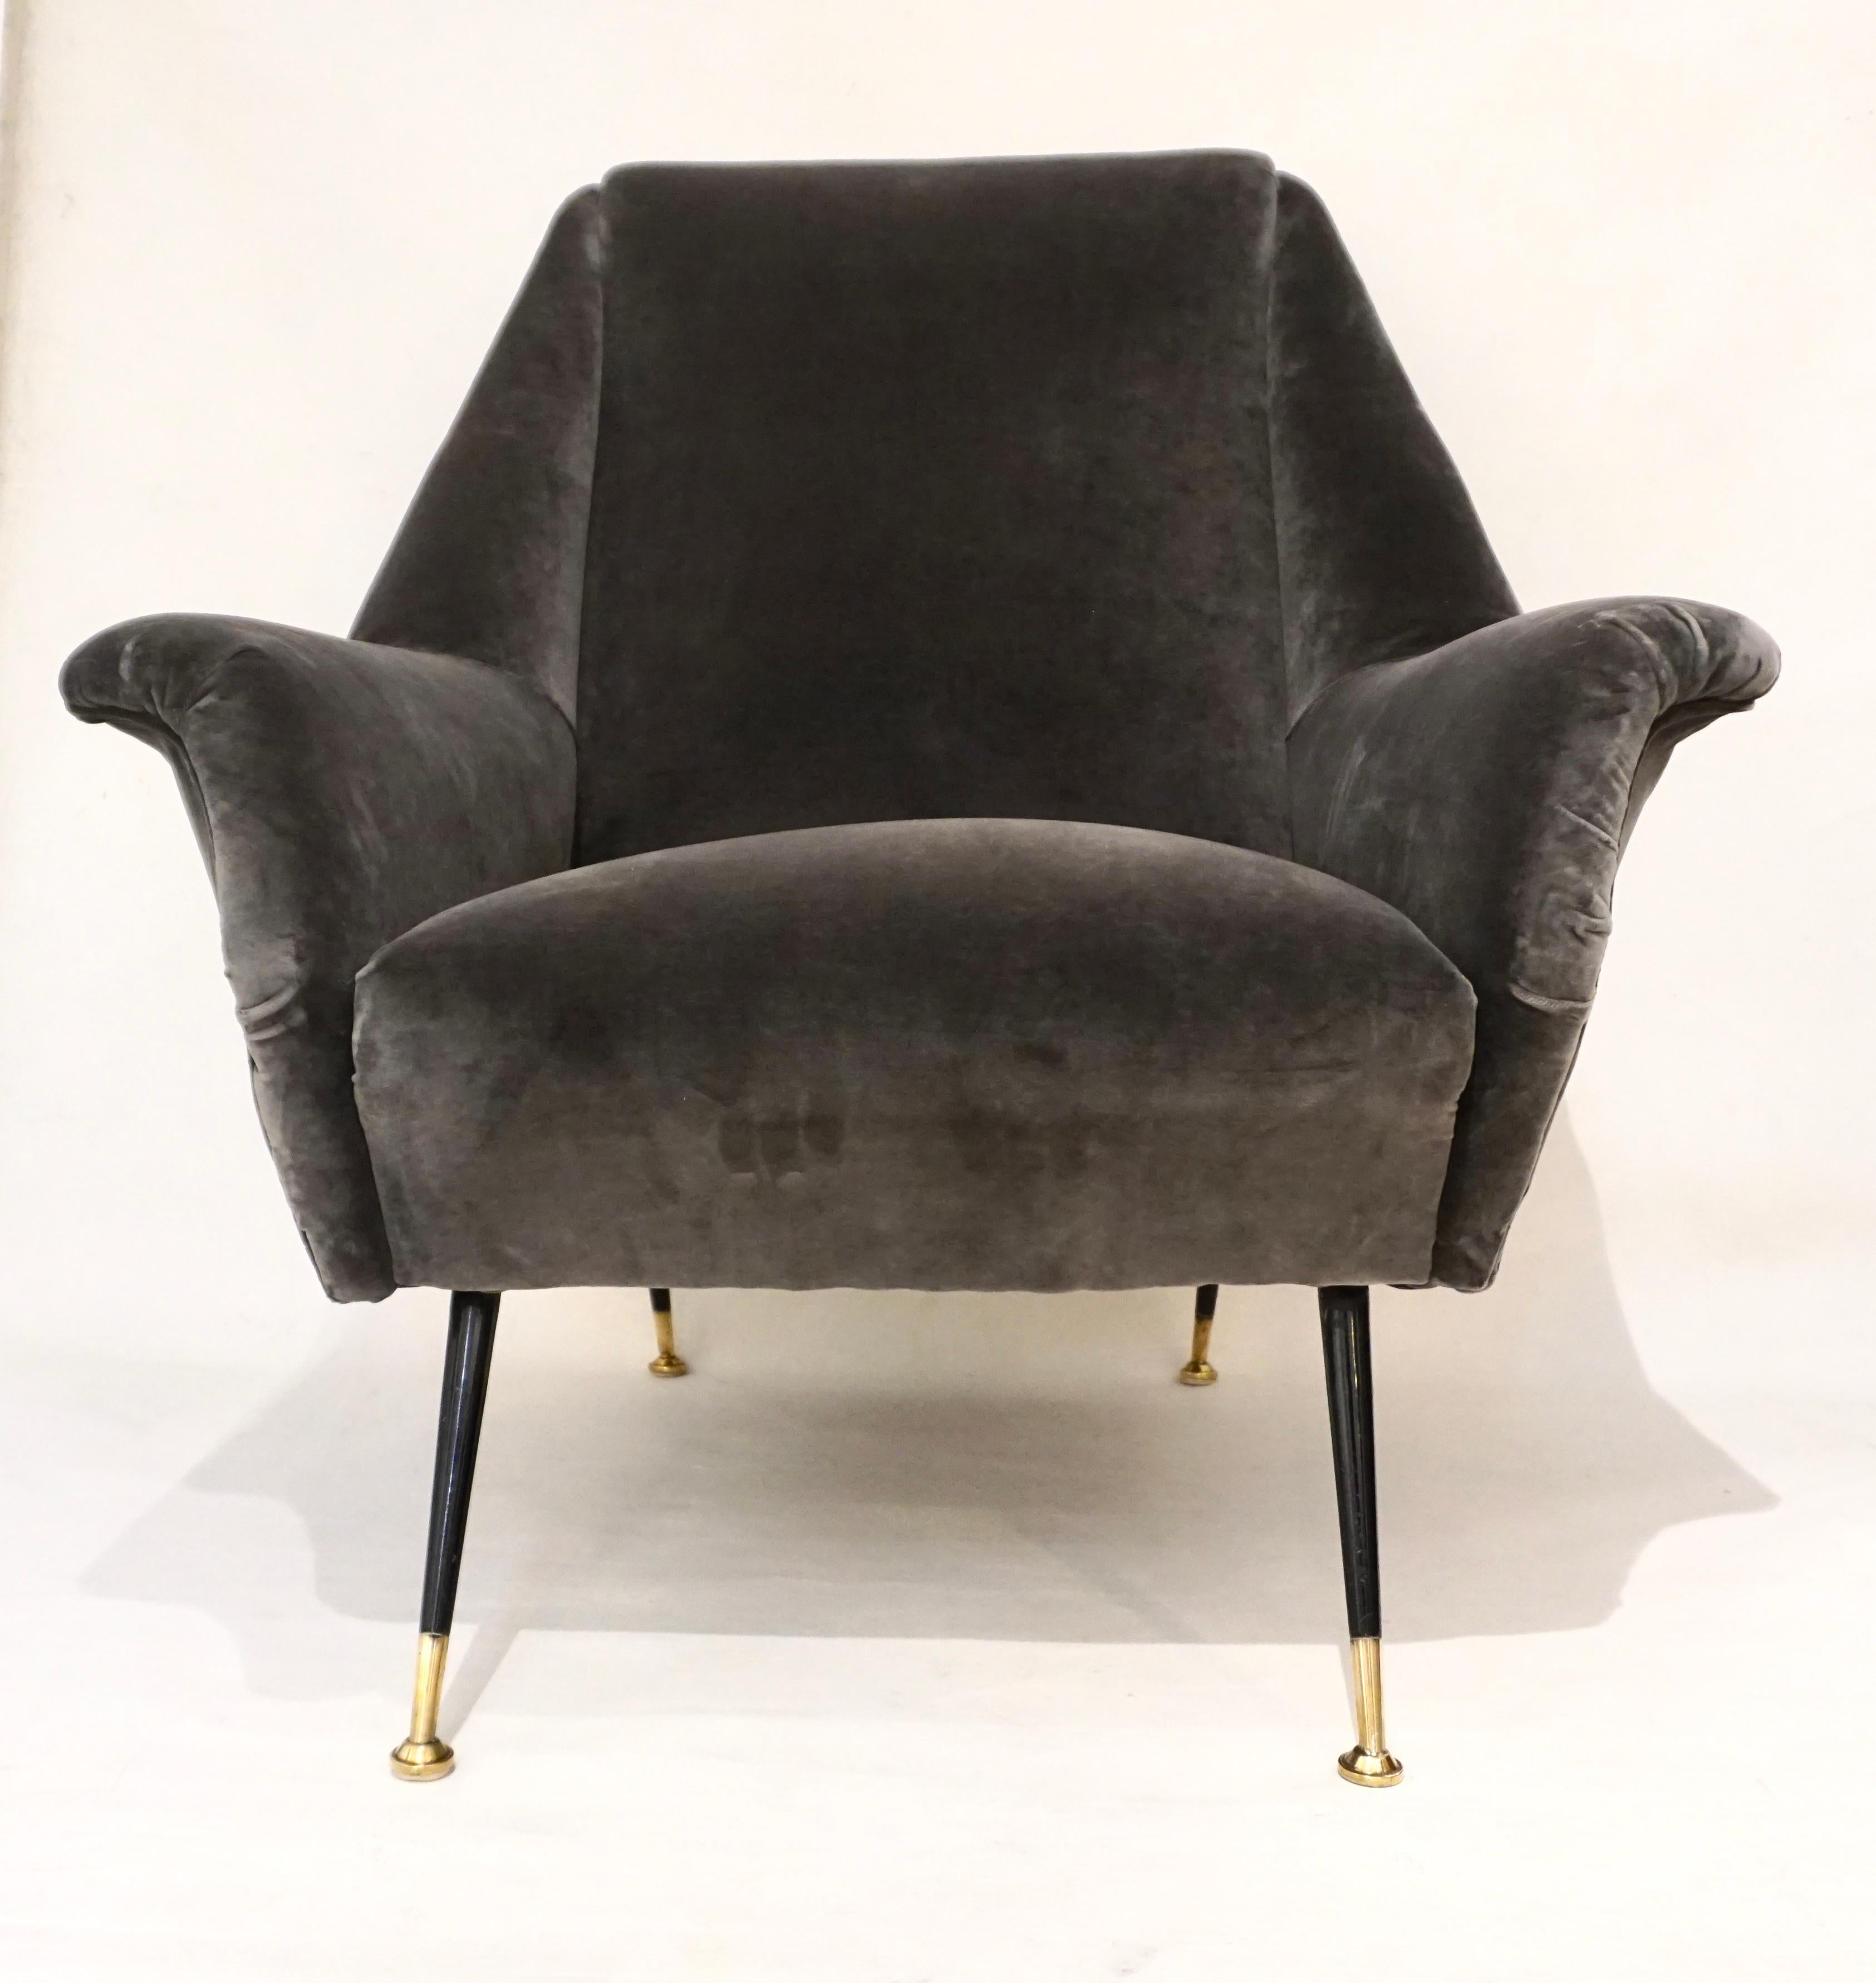 An elegant Italian Mid-Century Modern pair of very comfortable living room armchairs of great execution, by Gigi Radice for Minotti. The design is superb with a slightly curved large back and the side edges protruding to create the armrests and to